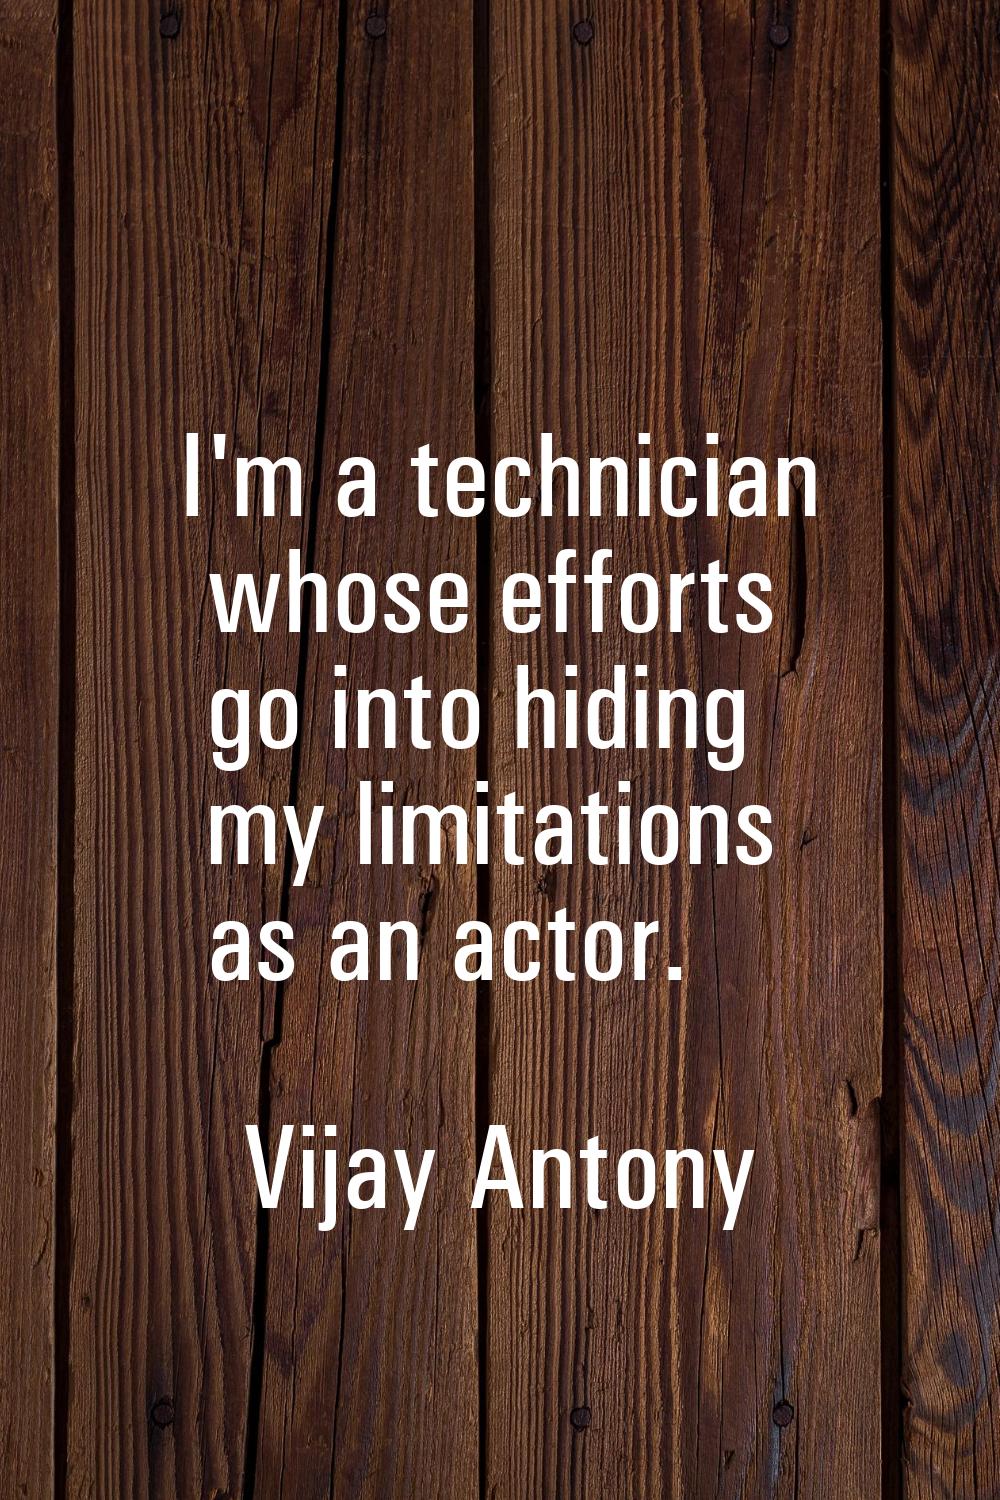 I'm a technician whose efforts go into hiding my limitations as an actor.